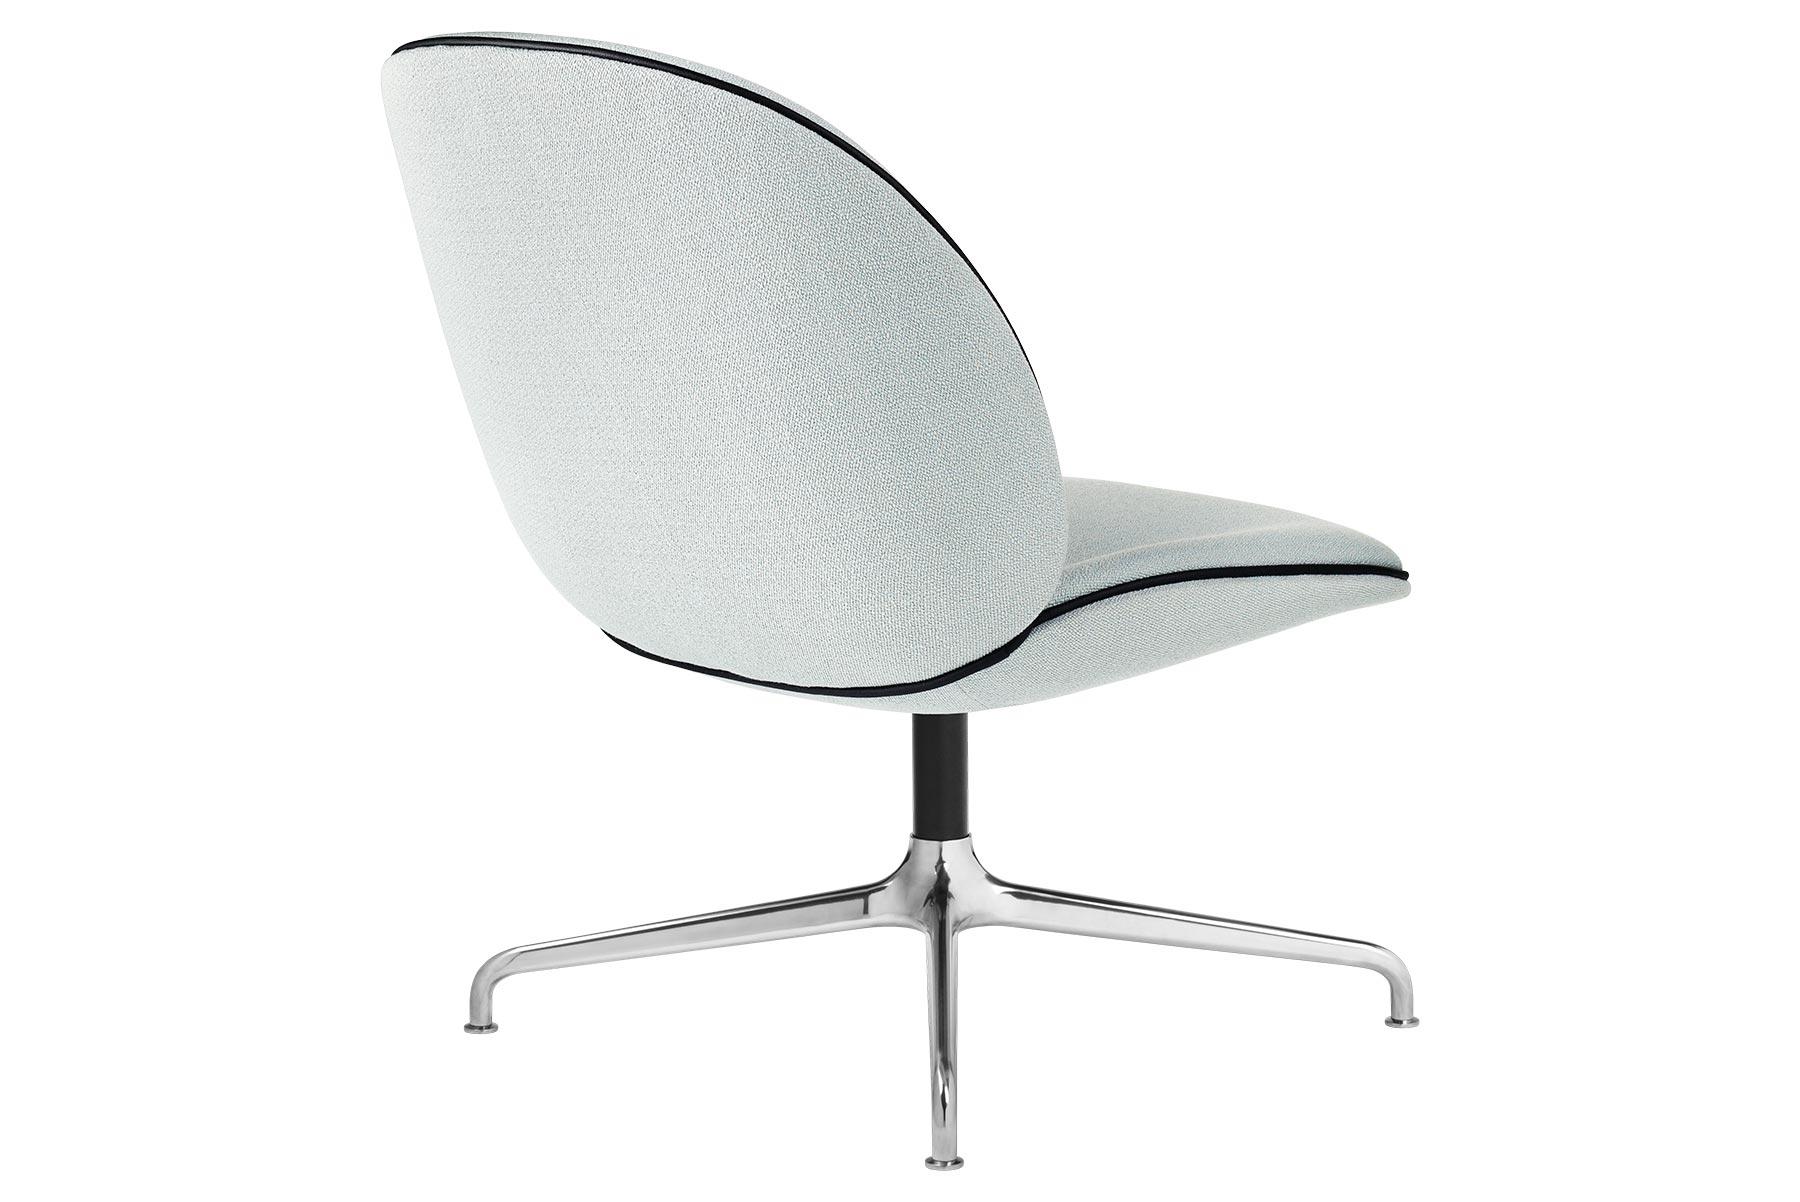 The Beetle lounge chair is with its comfortable design and generously proportioned silhouette, the perfect lounge chair for relaxation at any contemporary home. The Beetle lounge chair carries strong references to GamFratesi’s inspirational source,